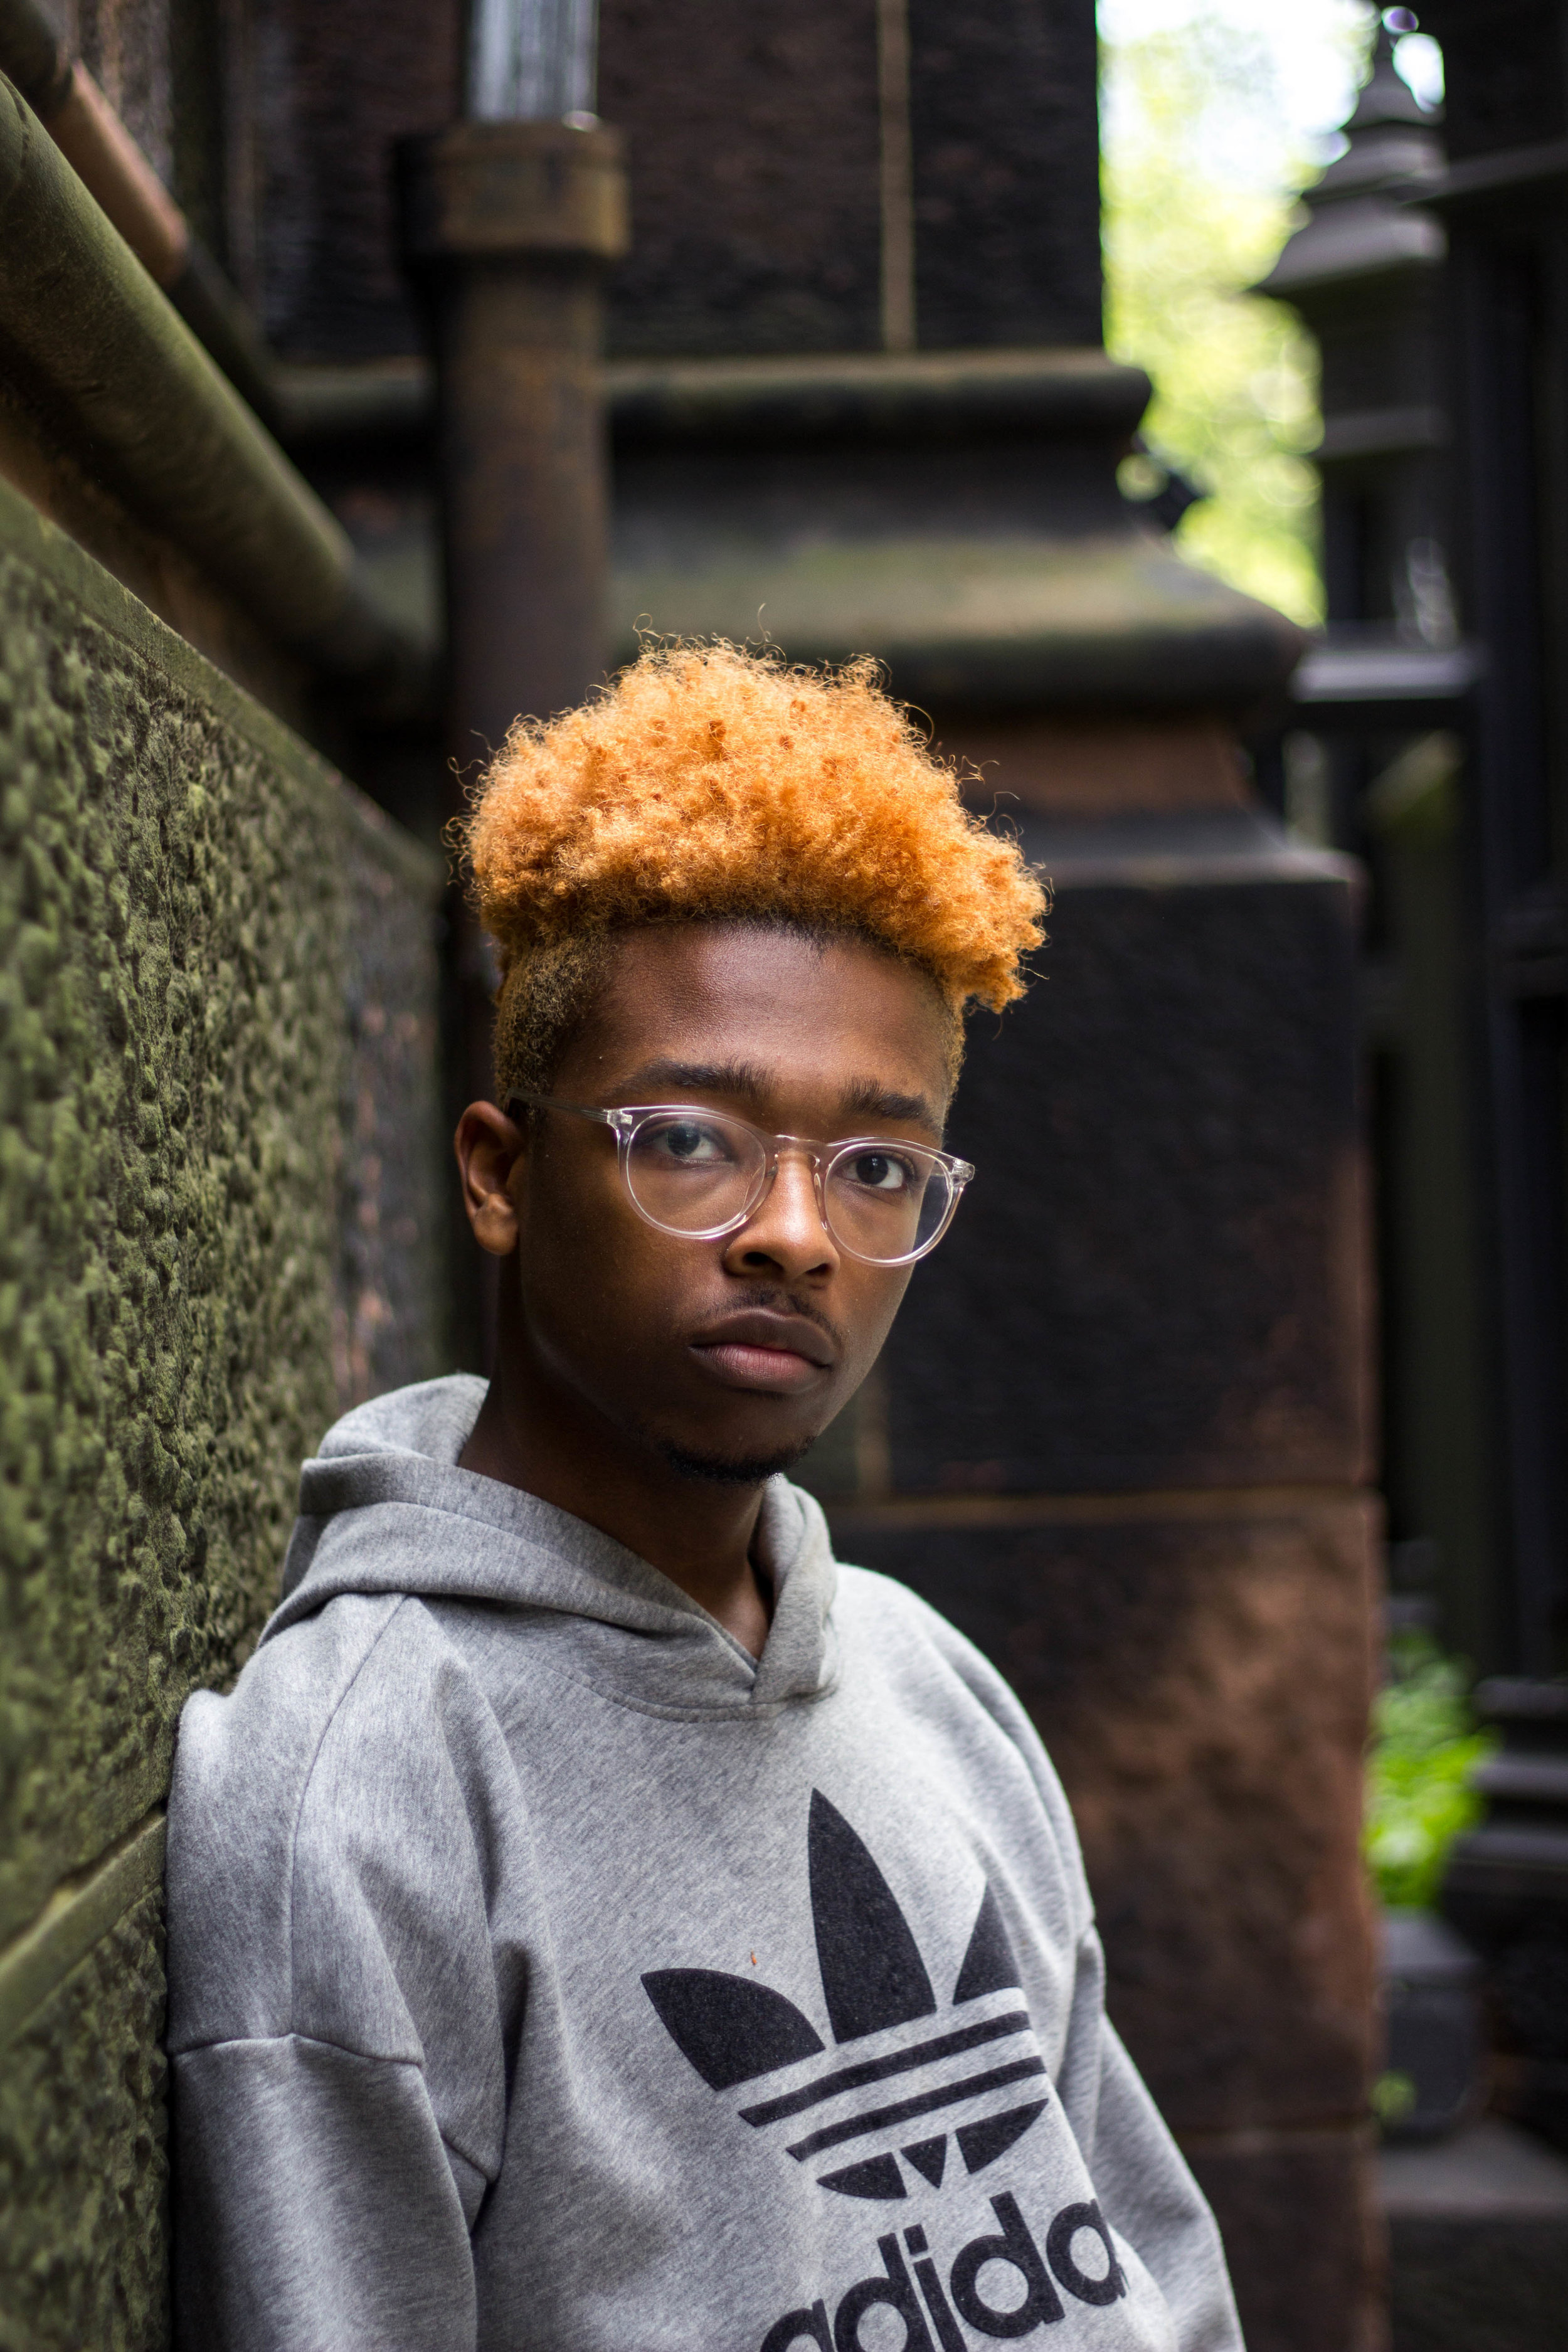  a Washington, D.C native photographer known as  "goldenpolaroid"&nbsp; living the dream in New York City. Now a rising sophomore at Parsons School of Design, he has captured the photography and media world with his bright take on portraiture and a r